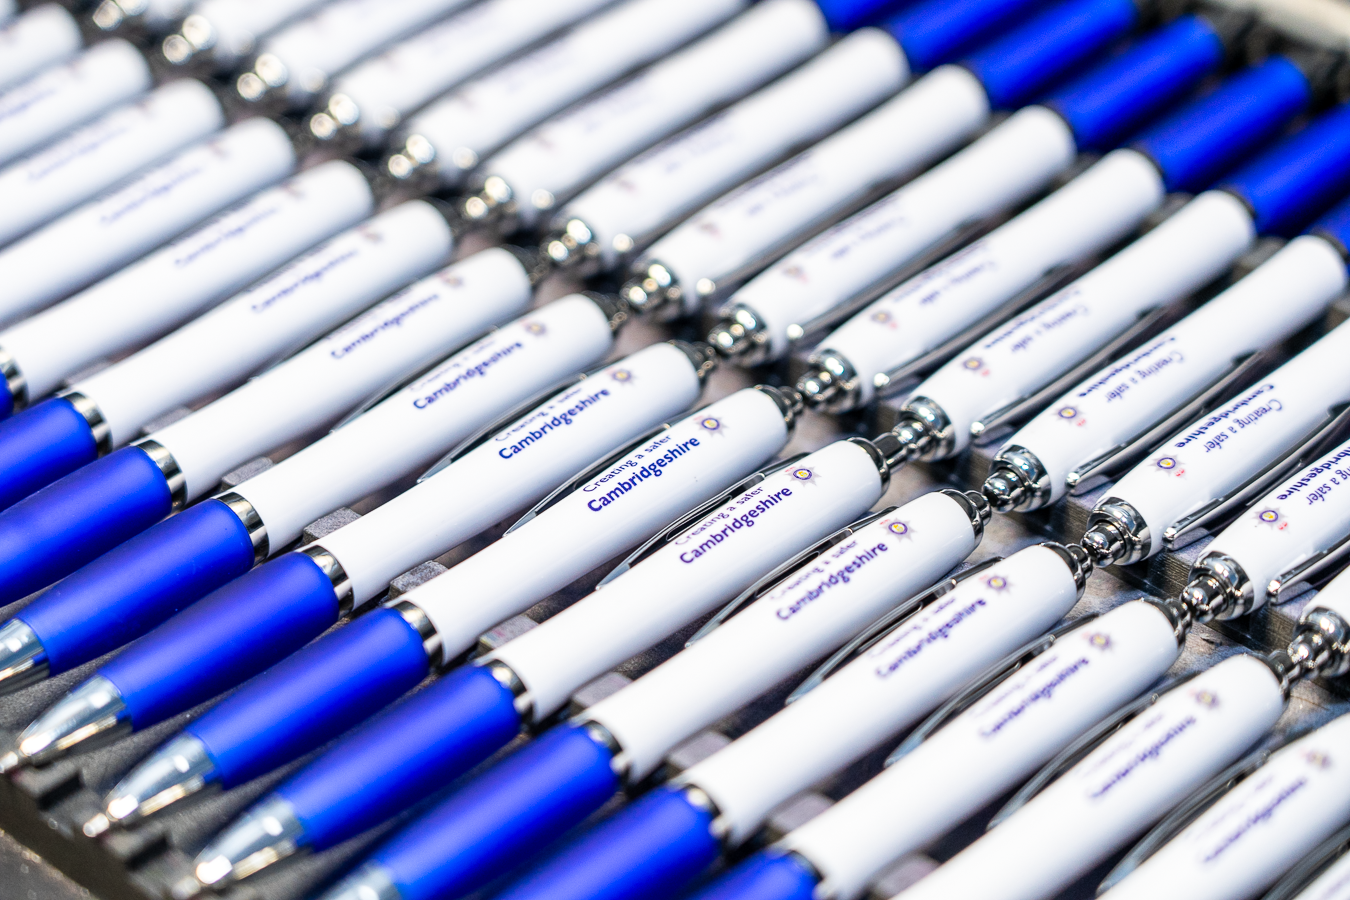 Branded Pens UK - Personalised pens with your logo printed